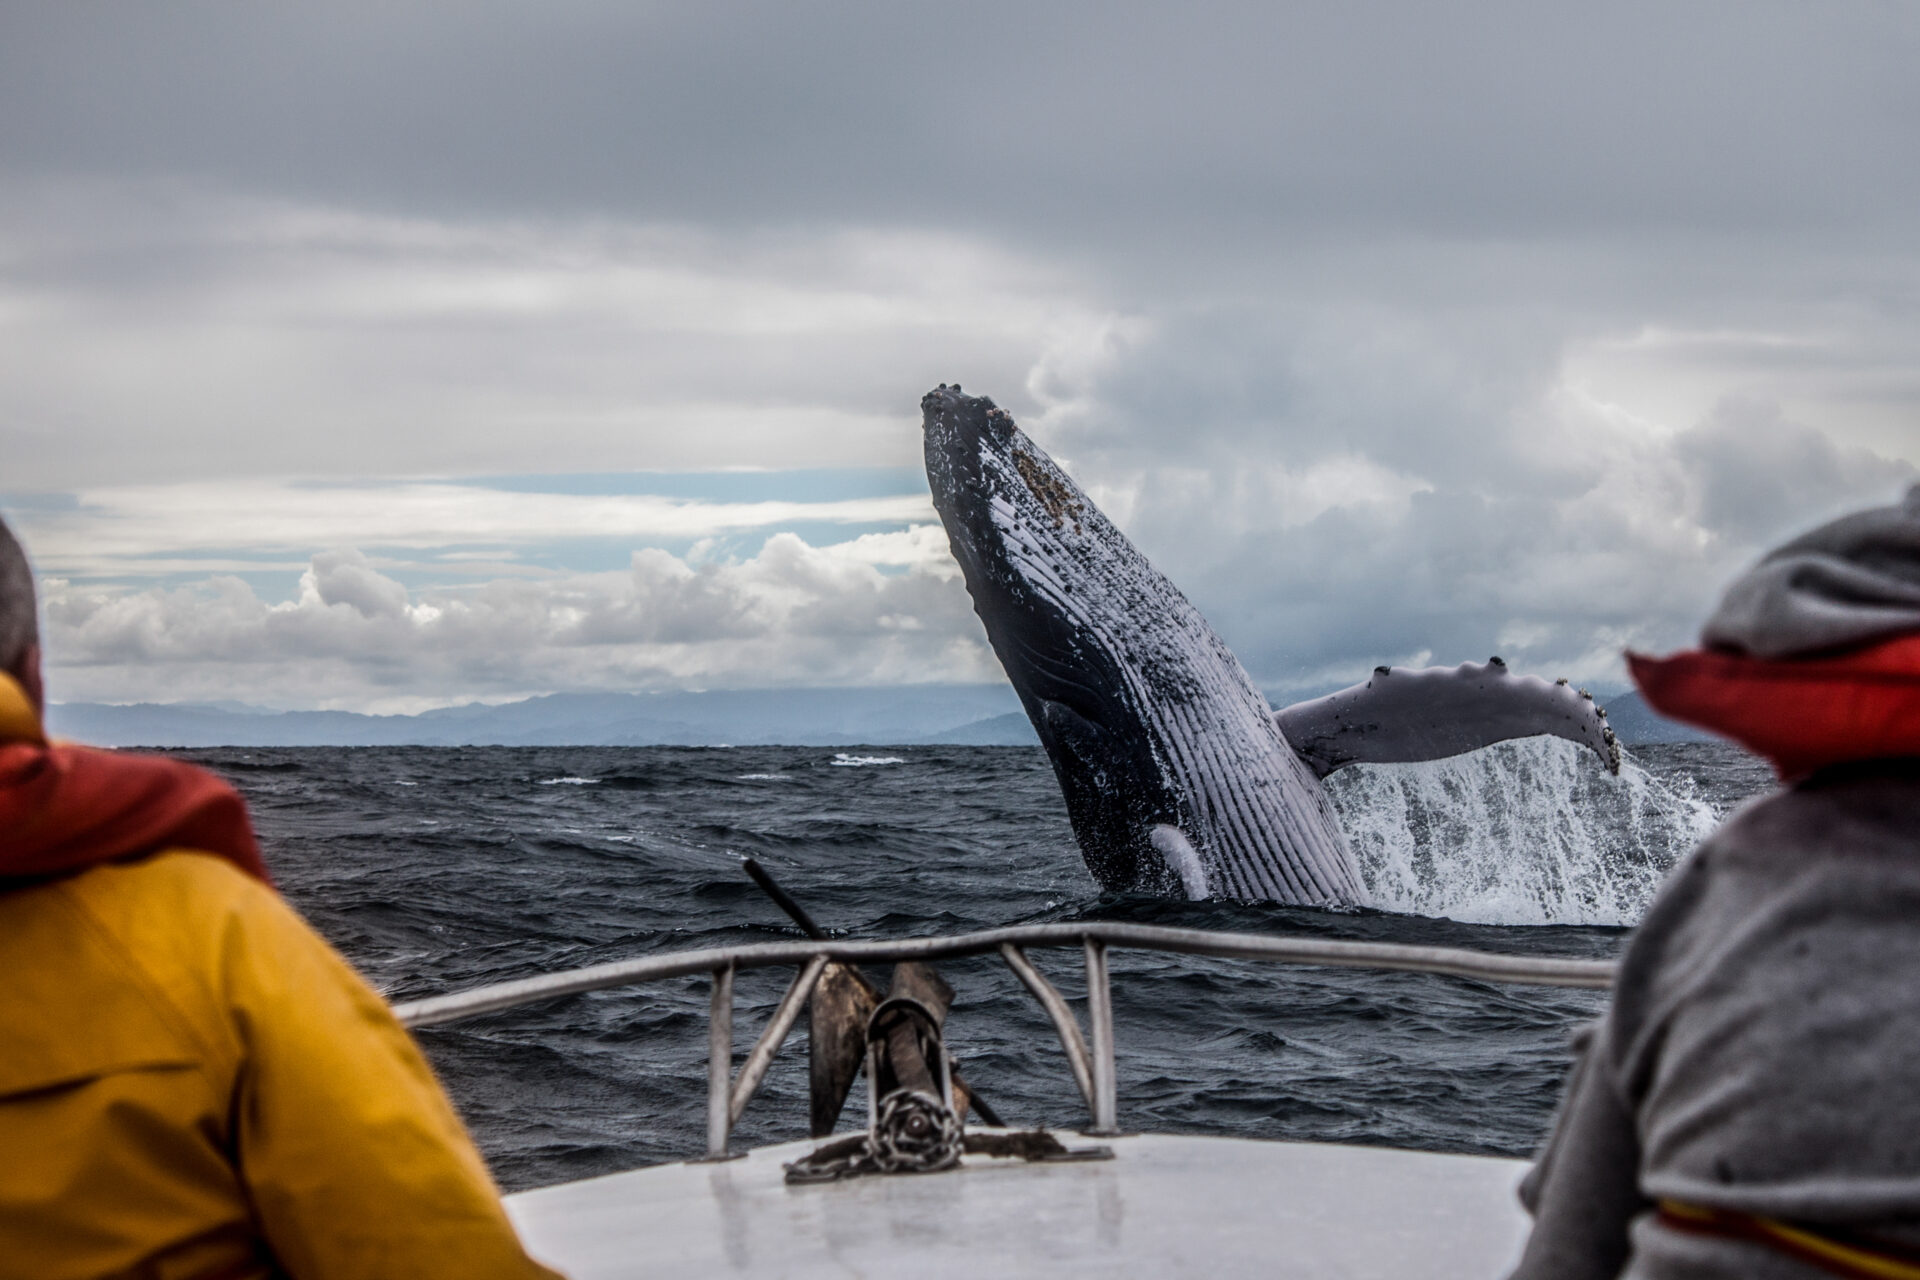 Whale watching by boat - a great option for whale watching in South Africa.